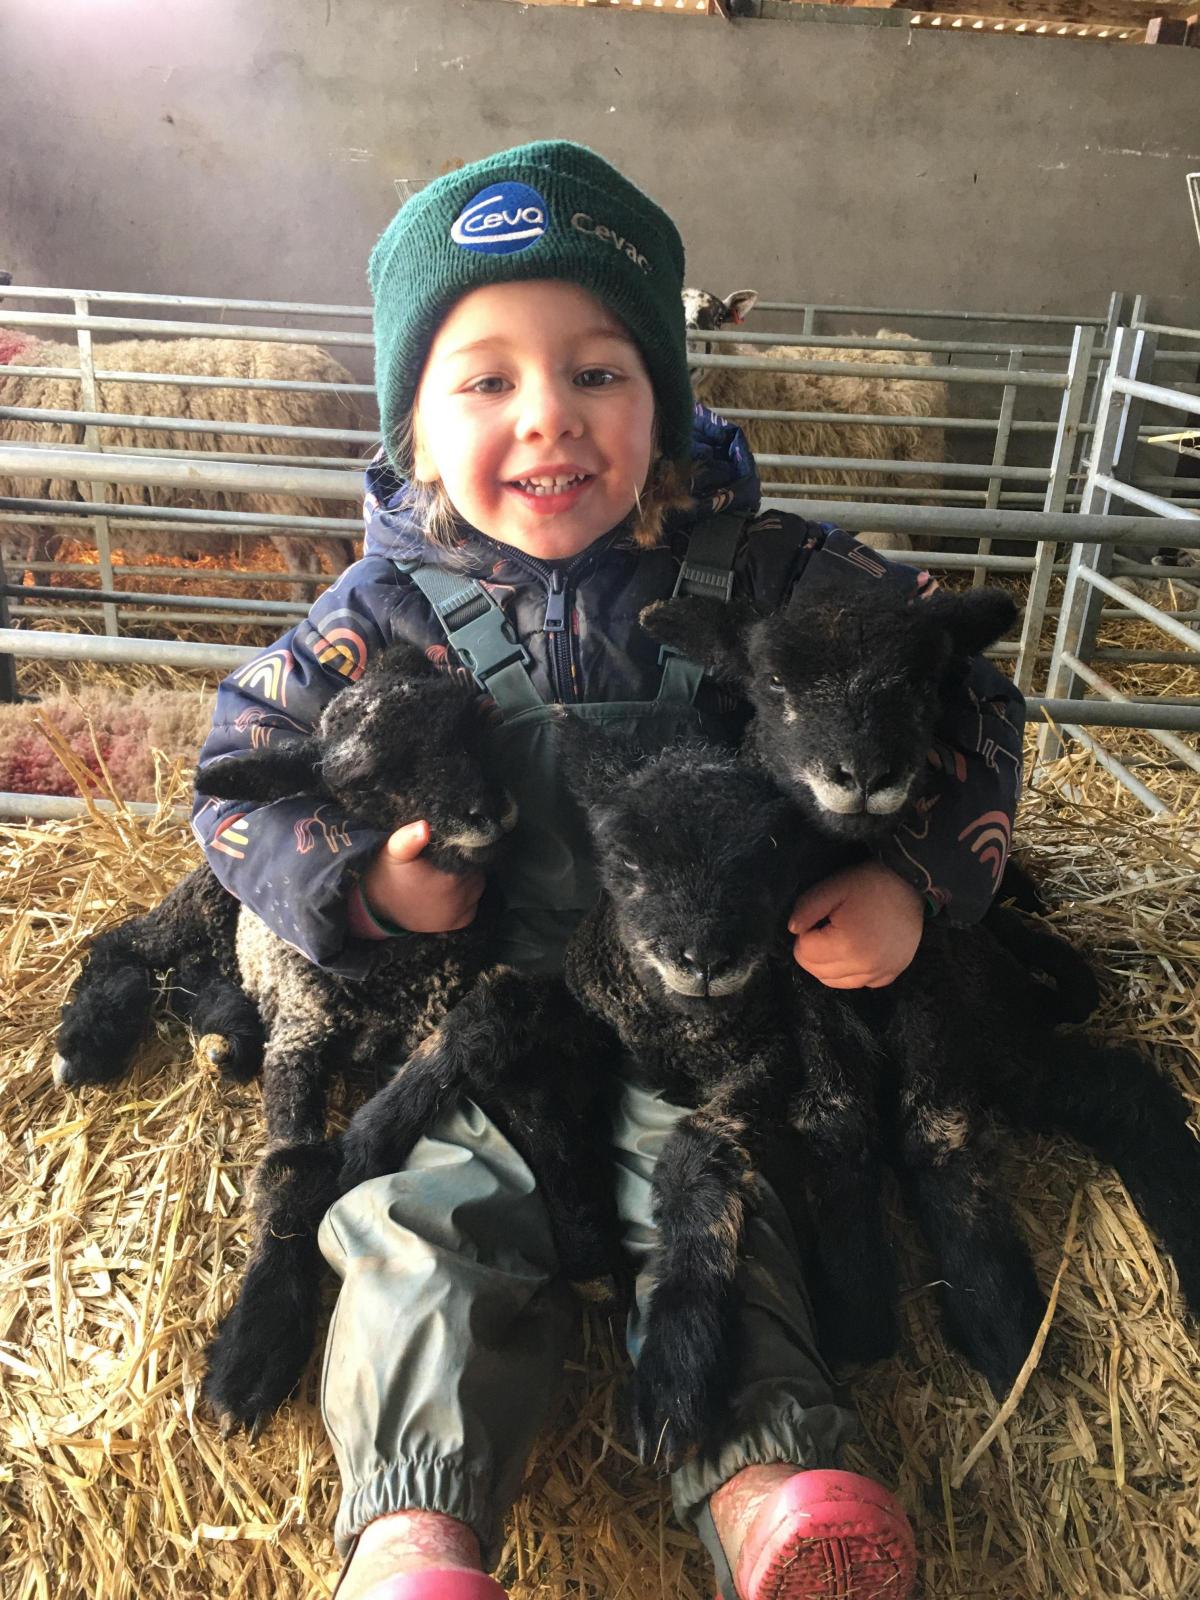 Christine Croal - Iona celebrated turned 3 (at the time of this photo in April) with her favourite Coloured Ryelands triplet ewe lambs